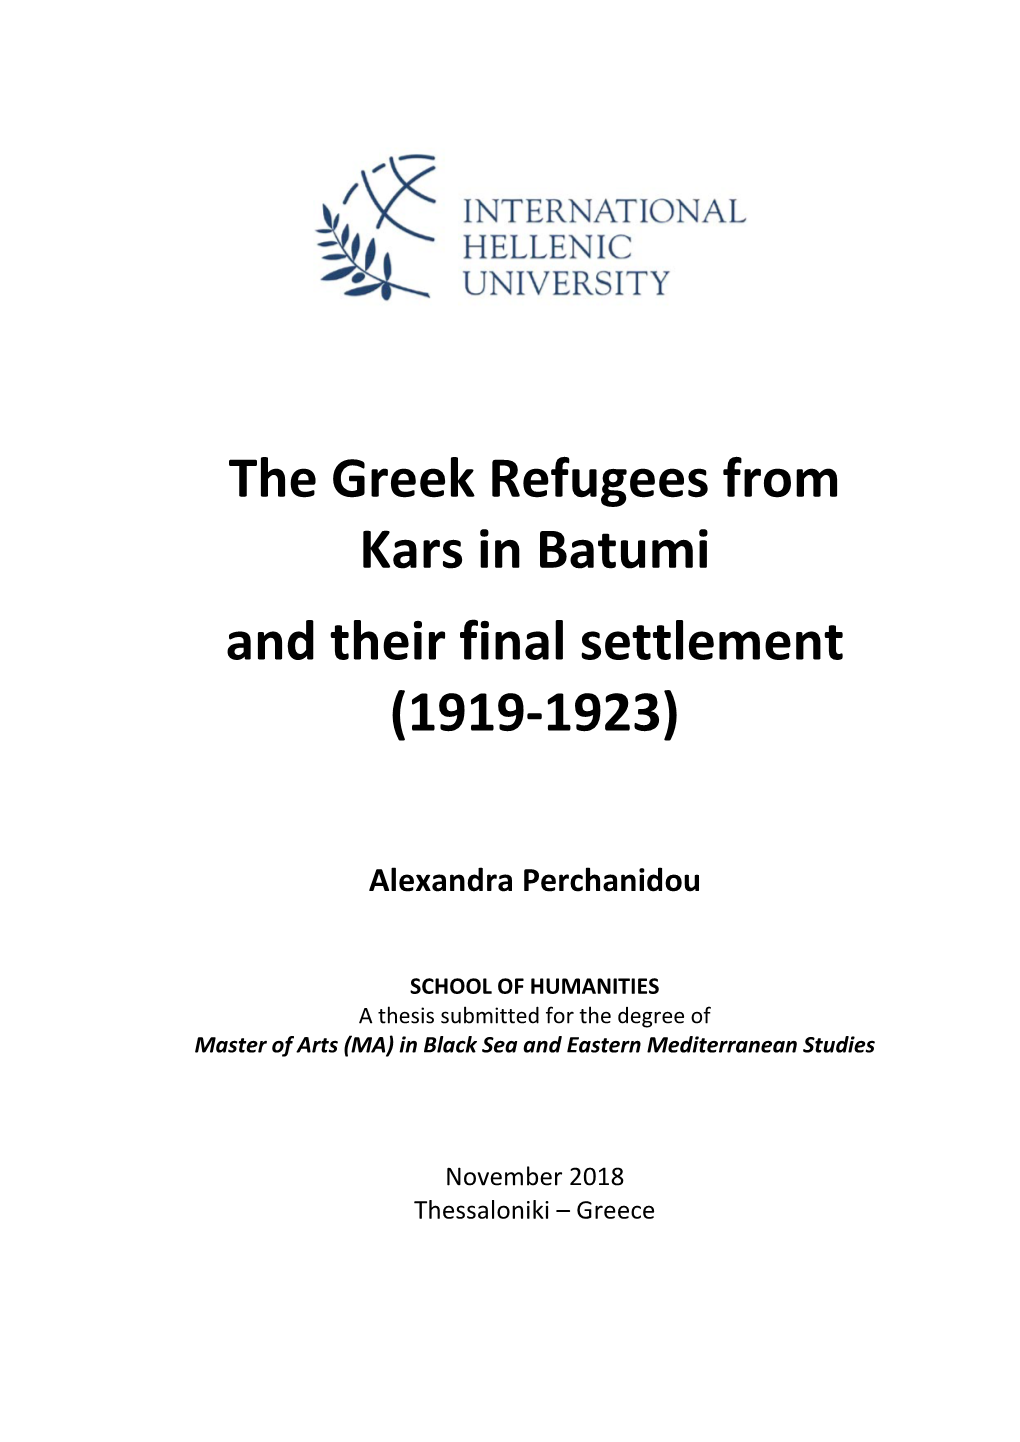 The Greek Refugees from Kars in Batumi and Their Final Settlement (1919-1923)